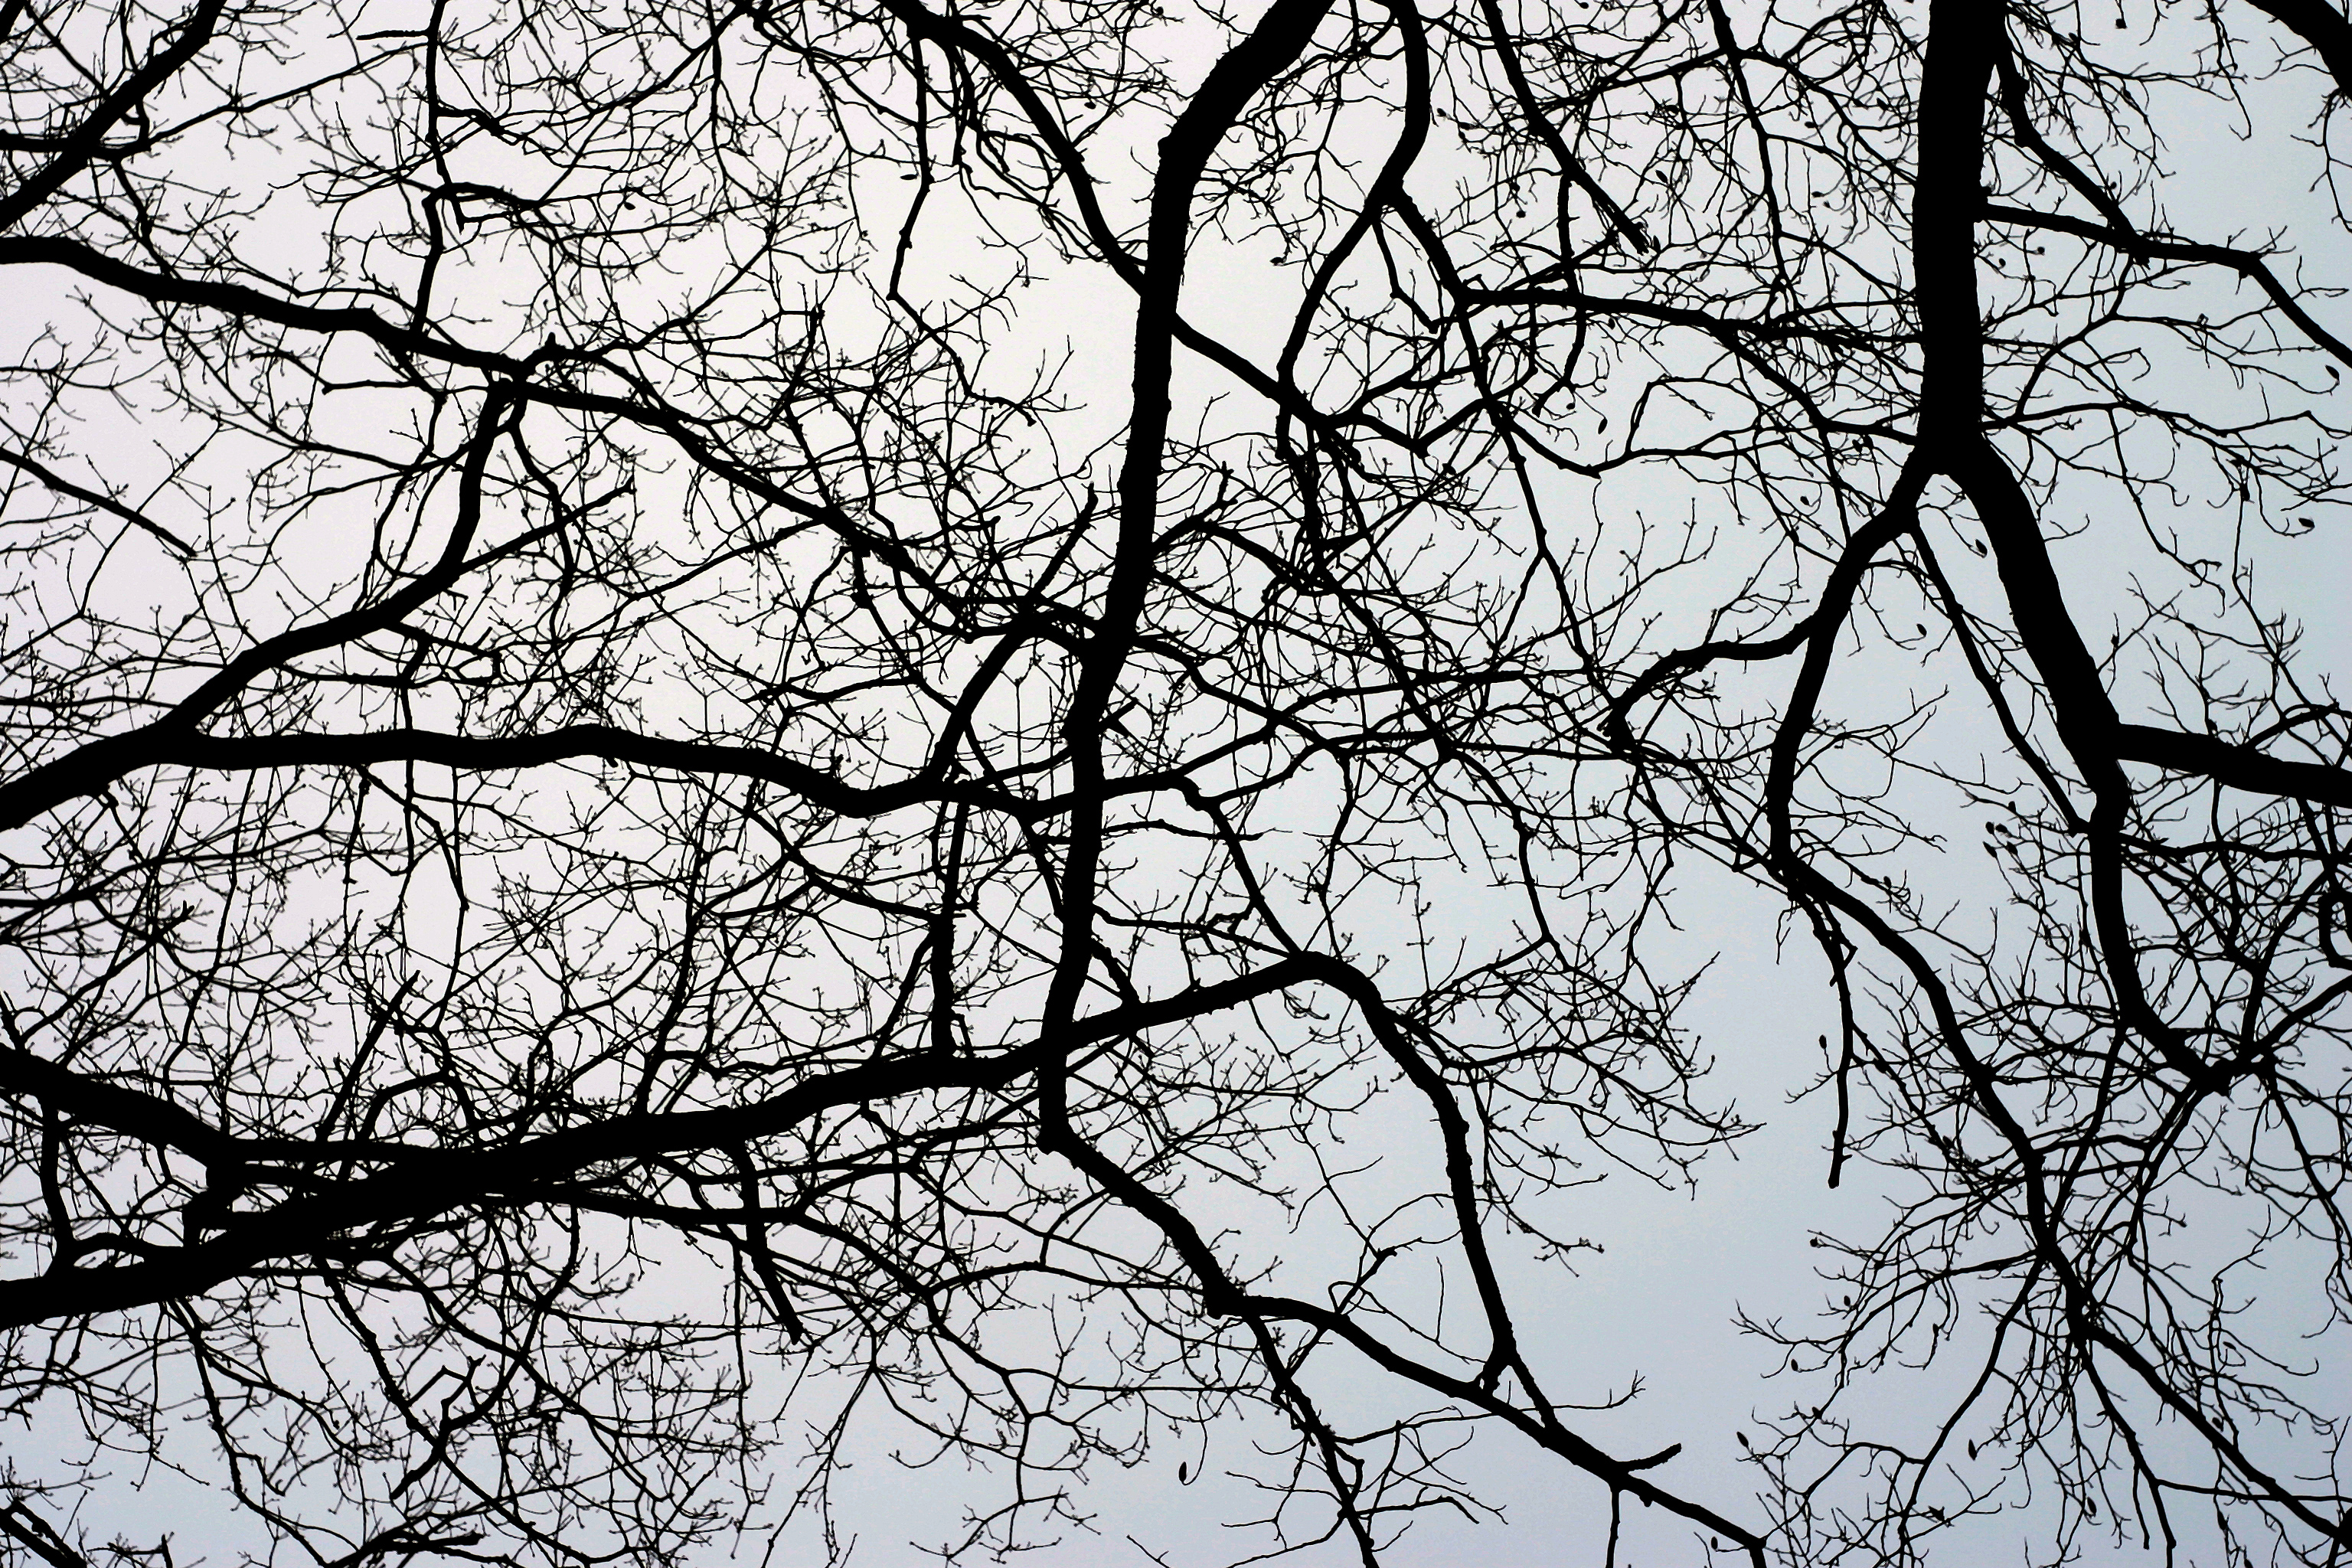  tree branches texture Black Background and some PPT Template